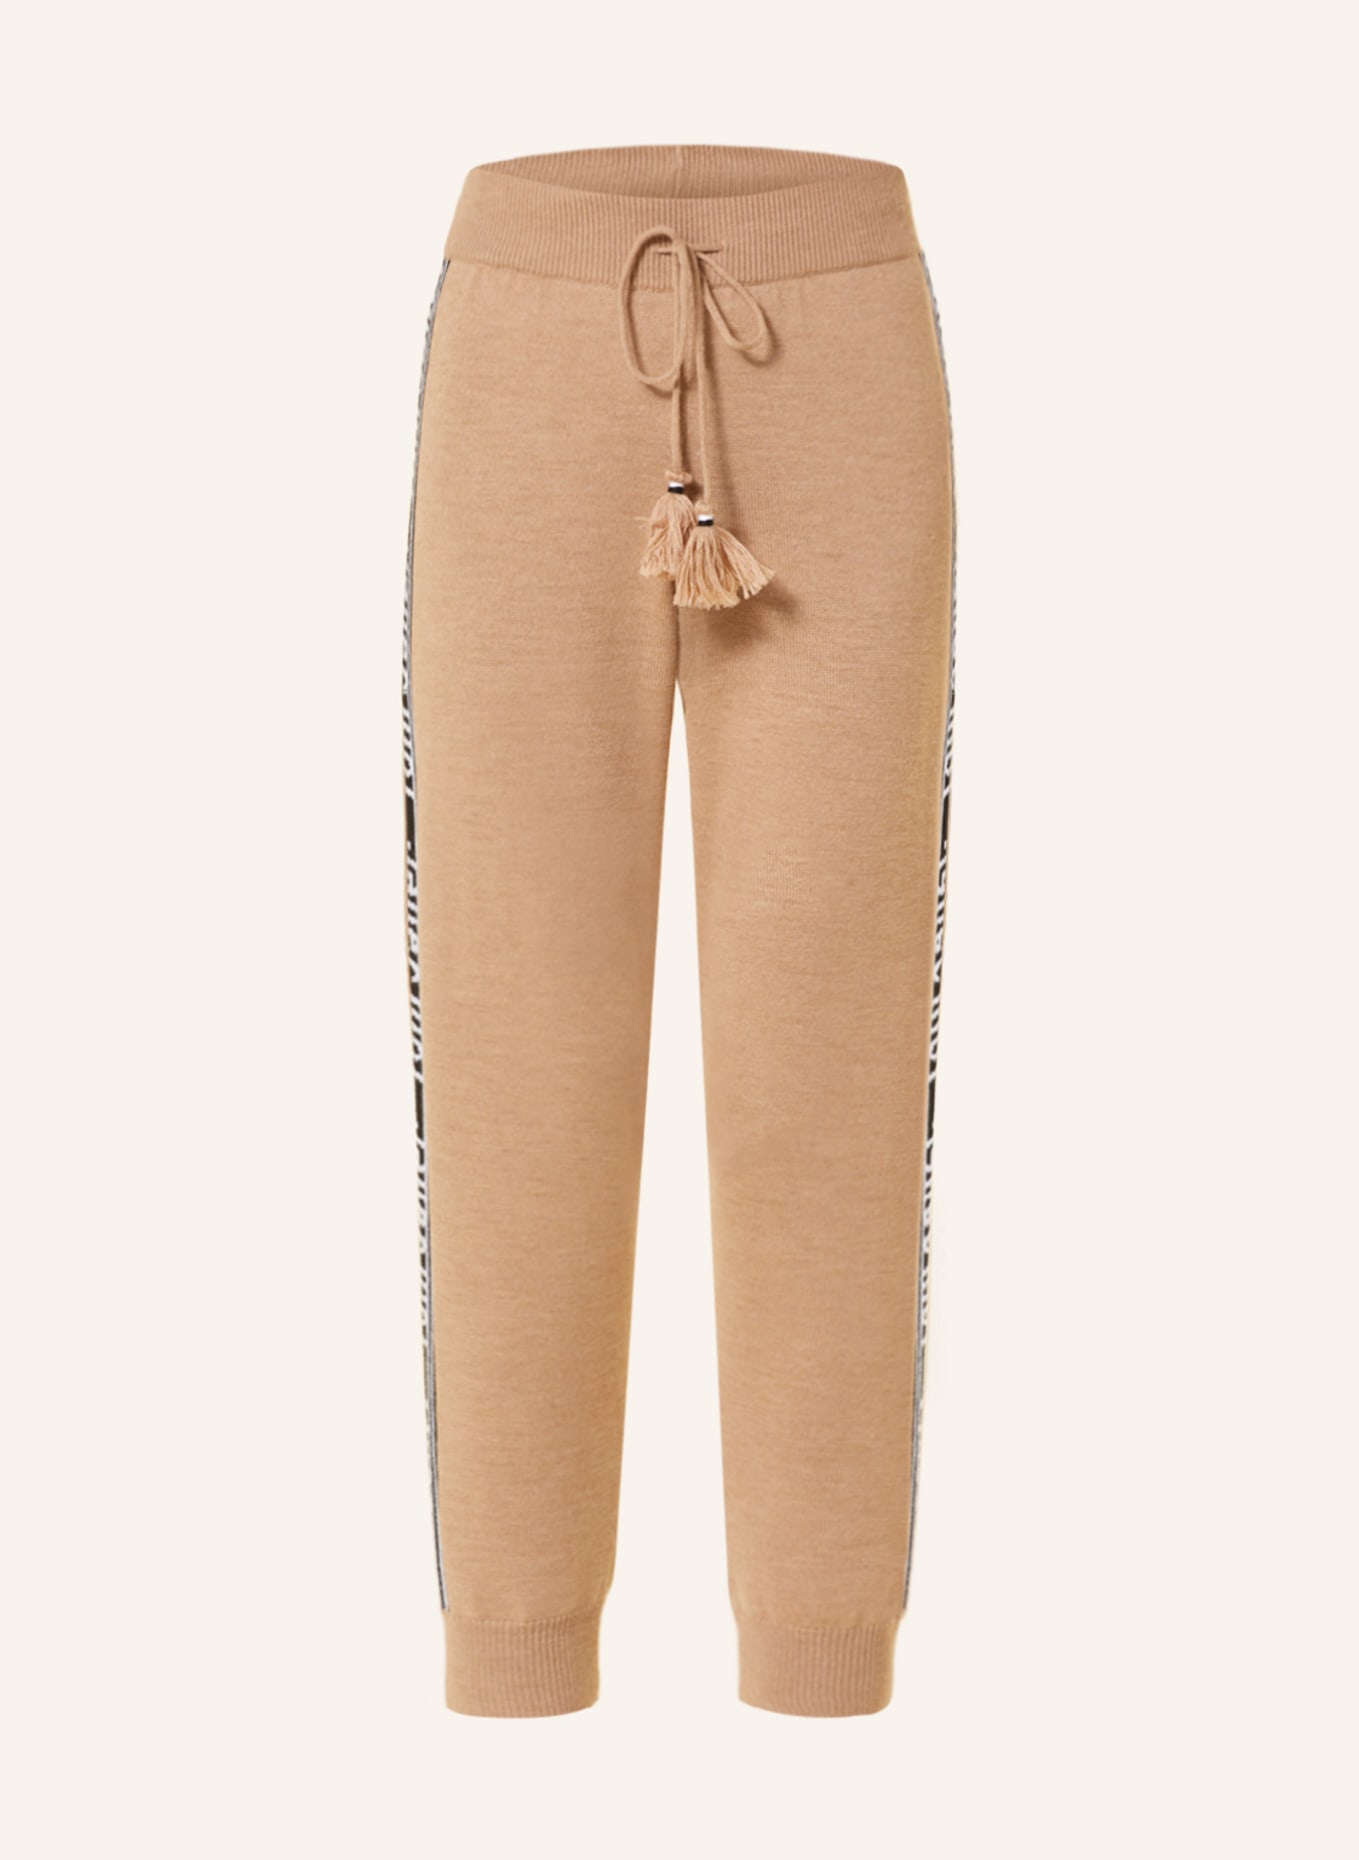 toni sailer Knit trousers SIRID in jogger style made of merino wool, Color: BEIGE/ BLACK/ WHITE (Image 1)